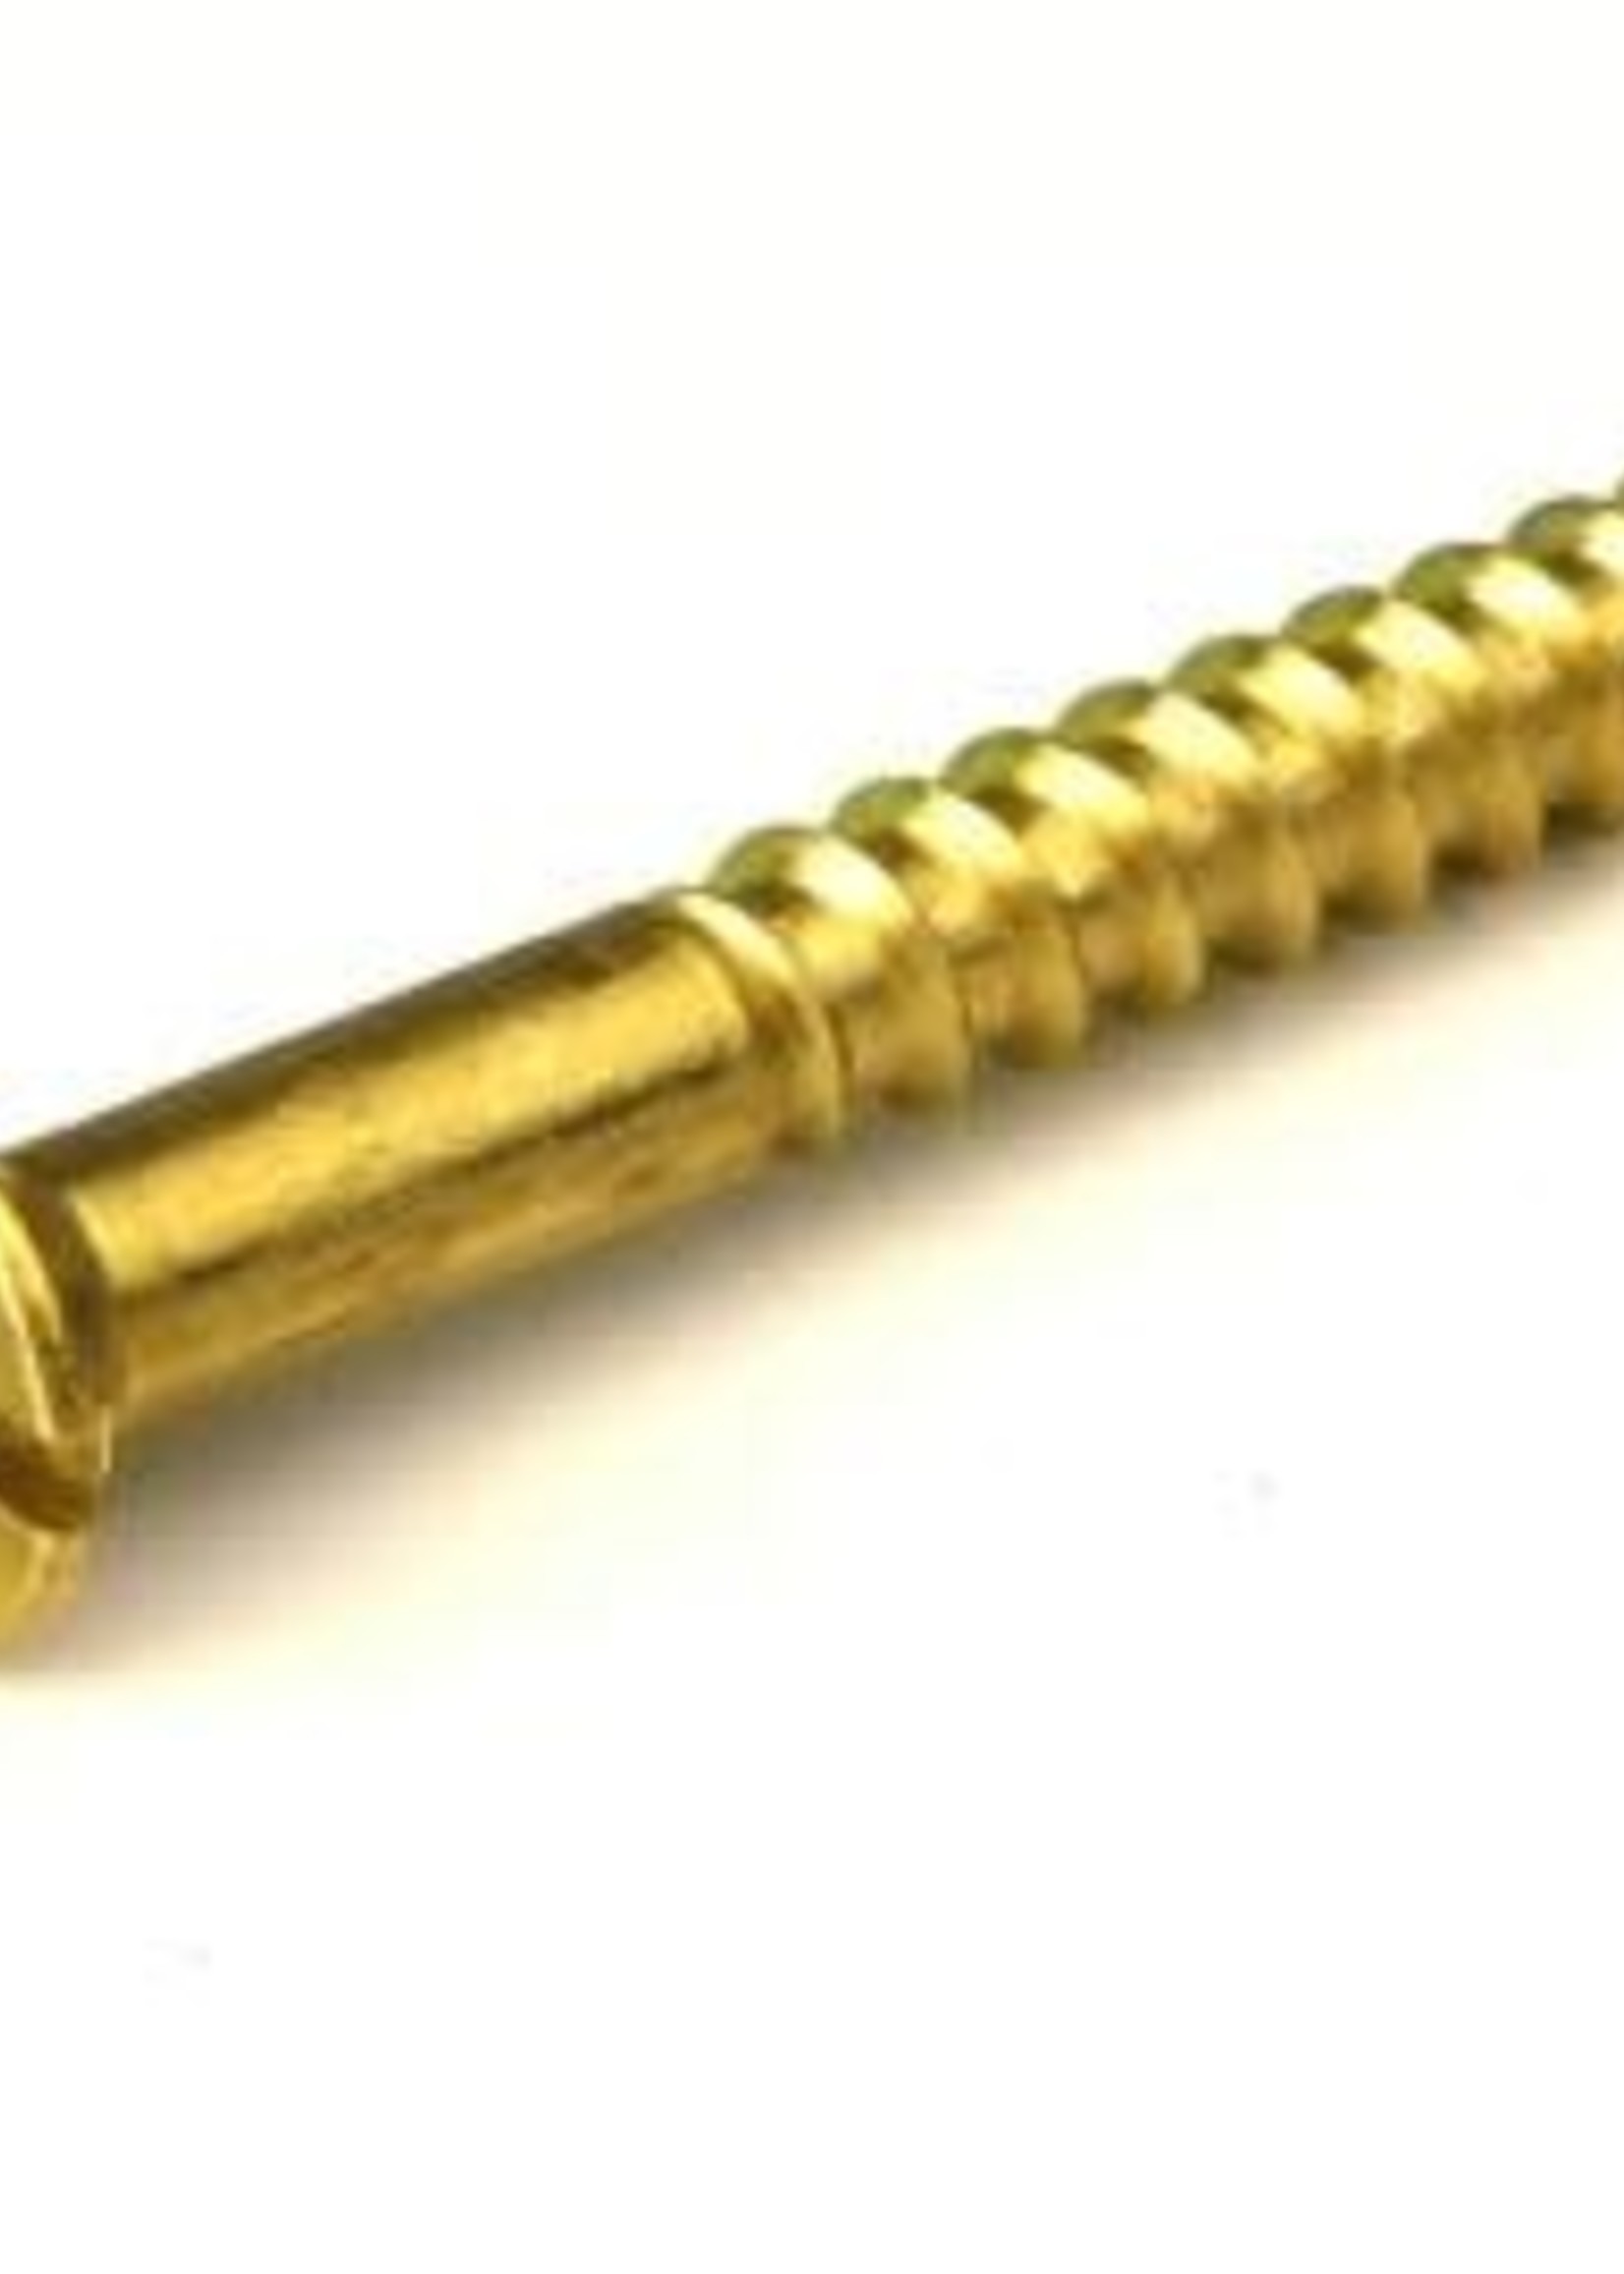 Securit Screws Brass CSK Slotted 4 3/4"